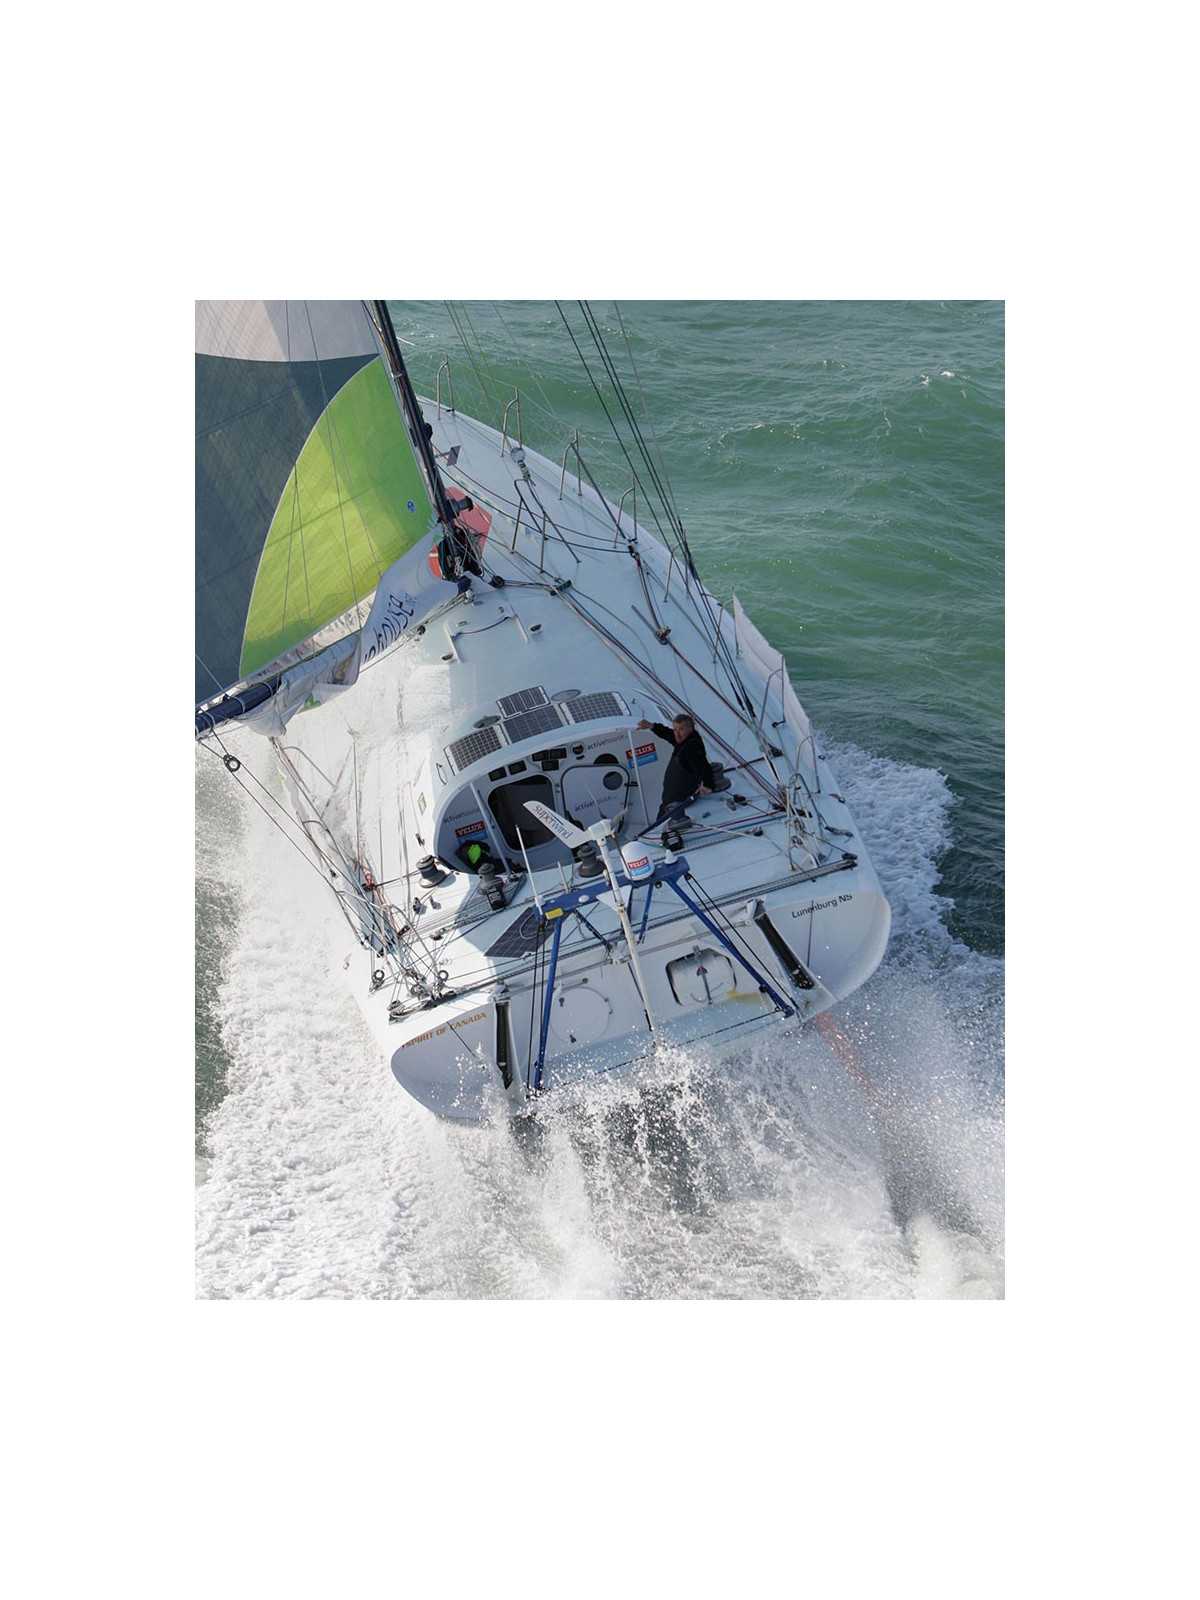  Eolienne Superwind 350W 24V